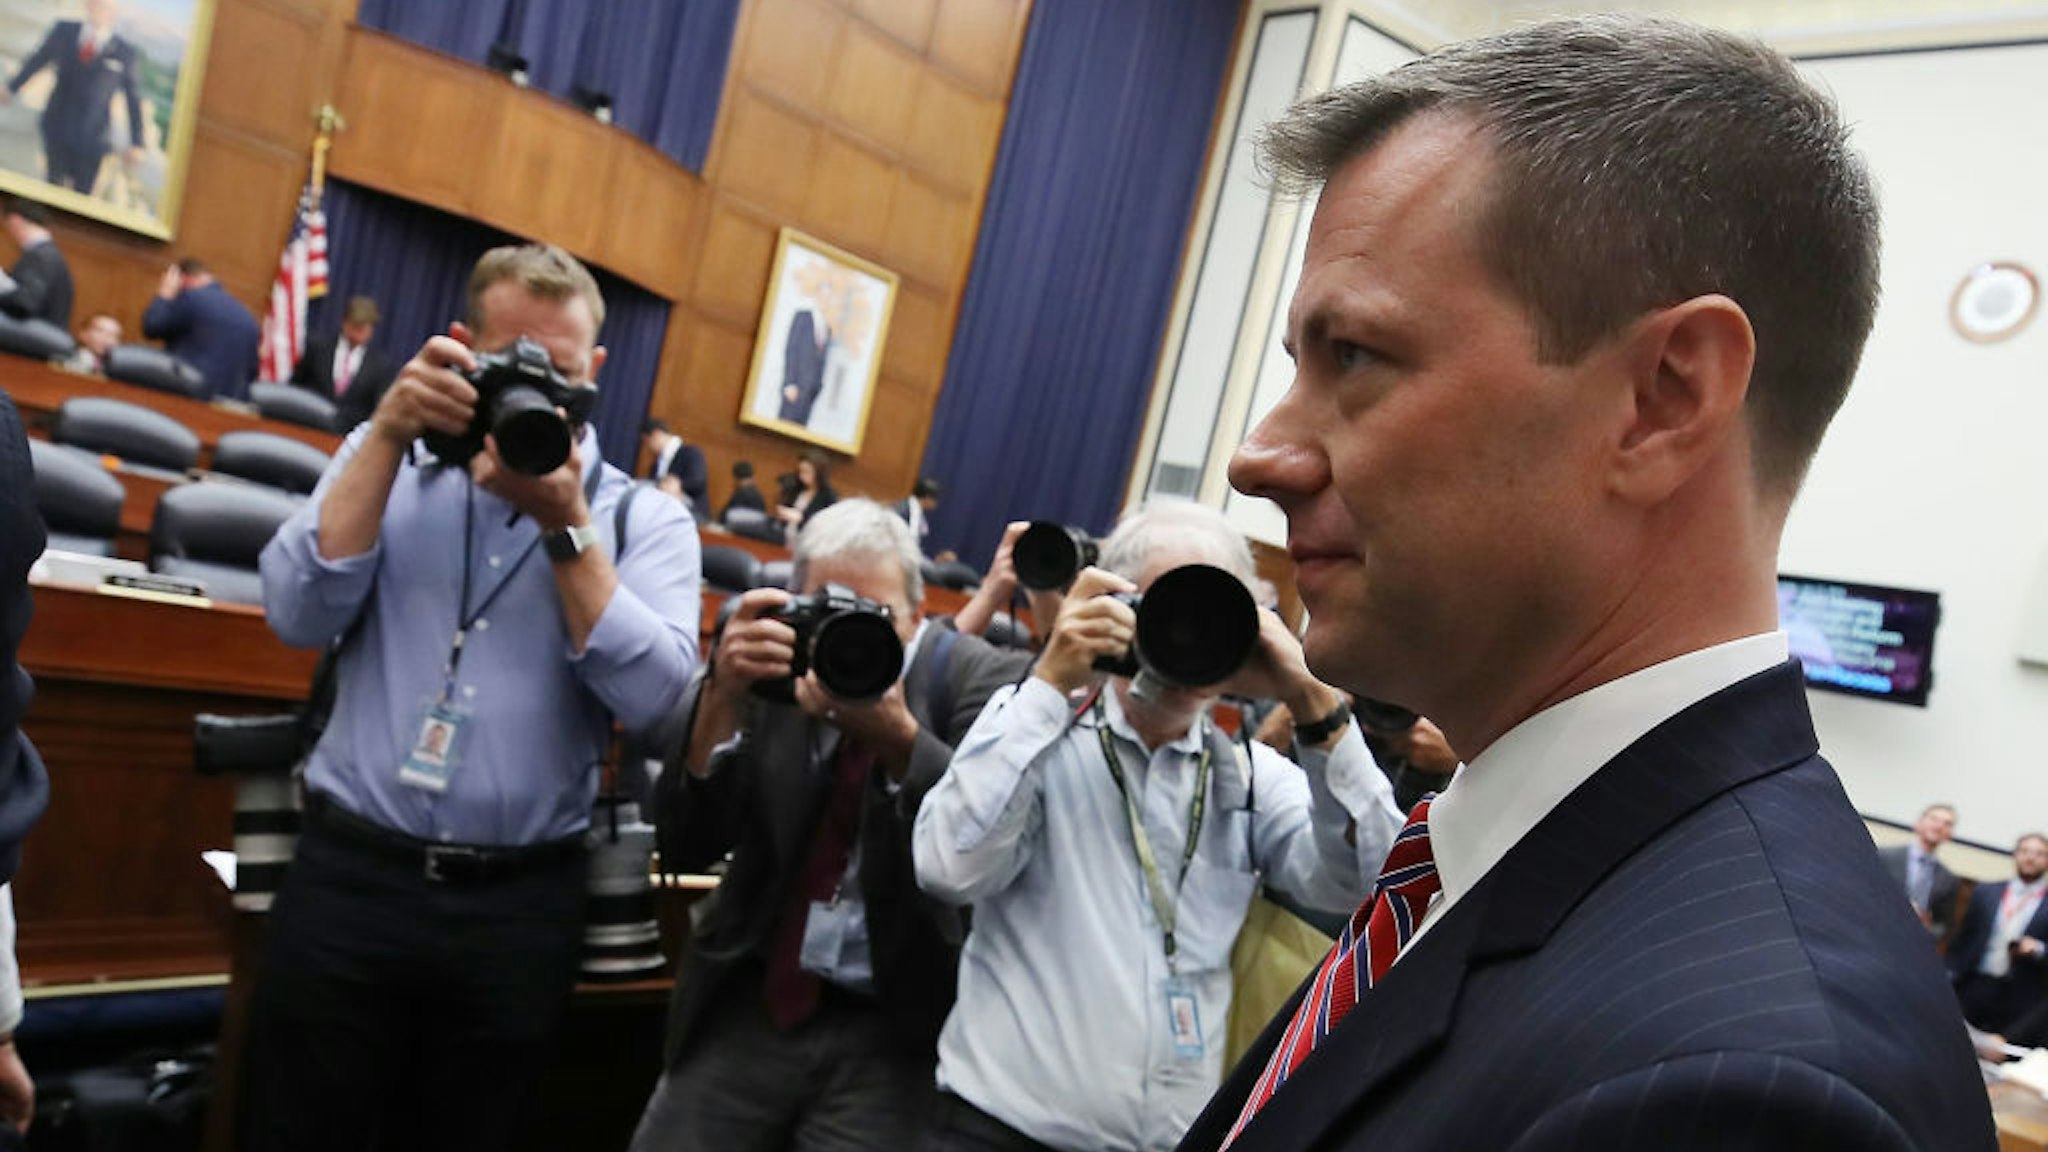 Deputy Assistant FBI Director Peter Strzok walks away during a break in a joint committee hearing of the House Judiciary and Oversight and Government Reform committees in the Rayburn House Office Building on Capitol Hill July 12, 2018 in Washington, DC. While involved in the probe into Hillary ClintonÕs use of a private email server in 2016, Strzok exchanged text messages with FBI attorney Lisa Page that were critical of Trump. After learning about the messages, Mueller removed Strzok from his investigation into whether the Trump campaign colluded with Russia to win the 2016 presidential election.Ê (Photo by Mark Wilson/Getty Images)